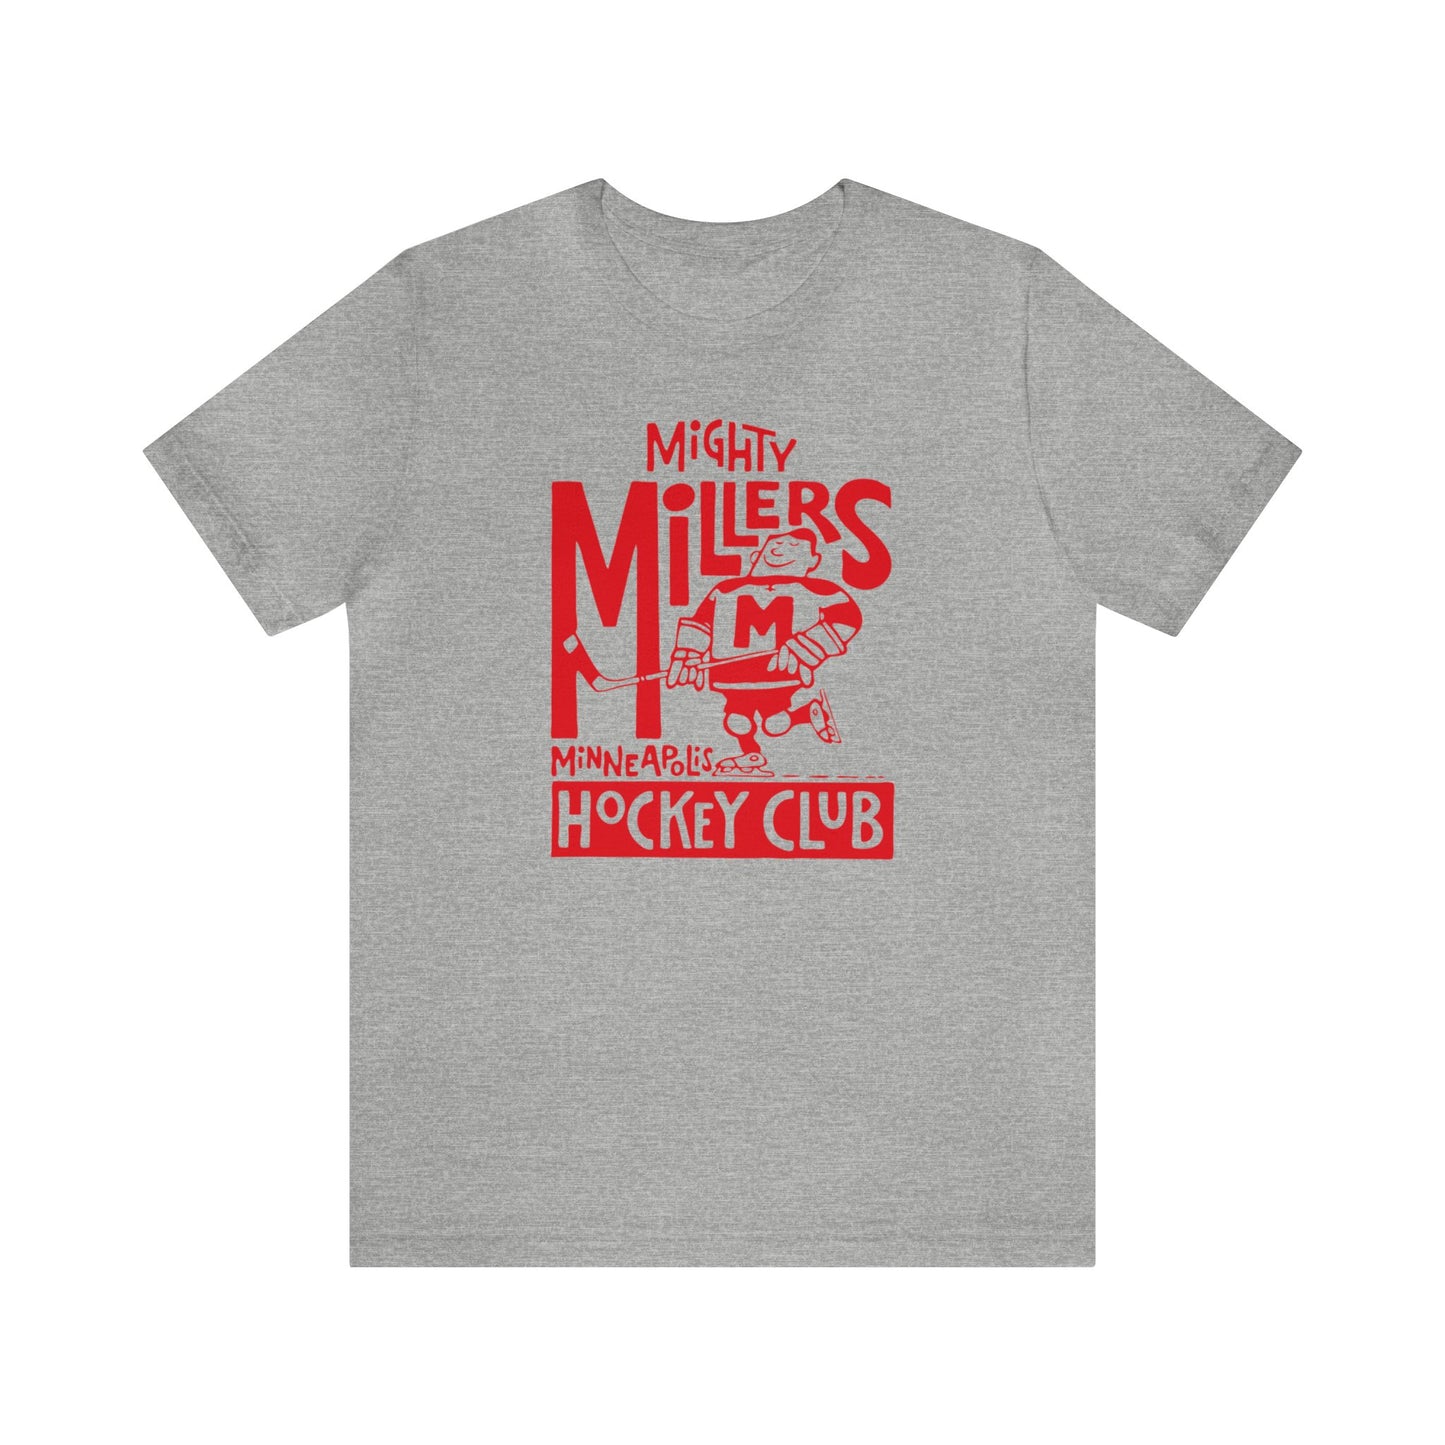 Minneapolis Mighty Millers Shirt